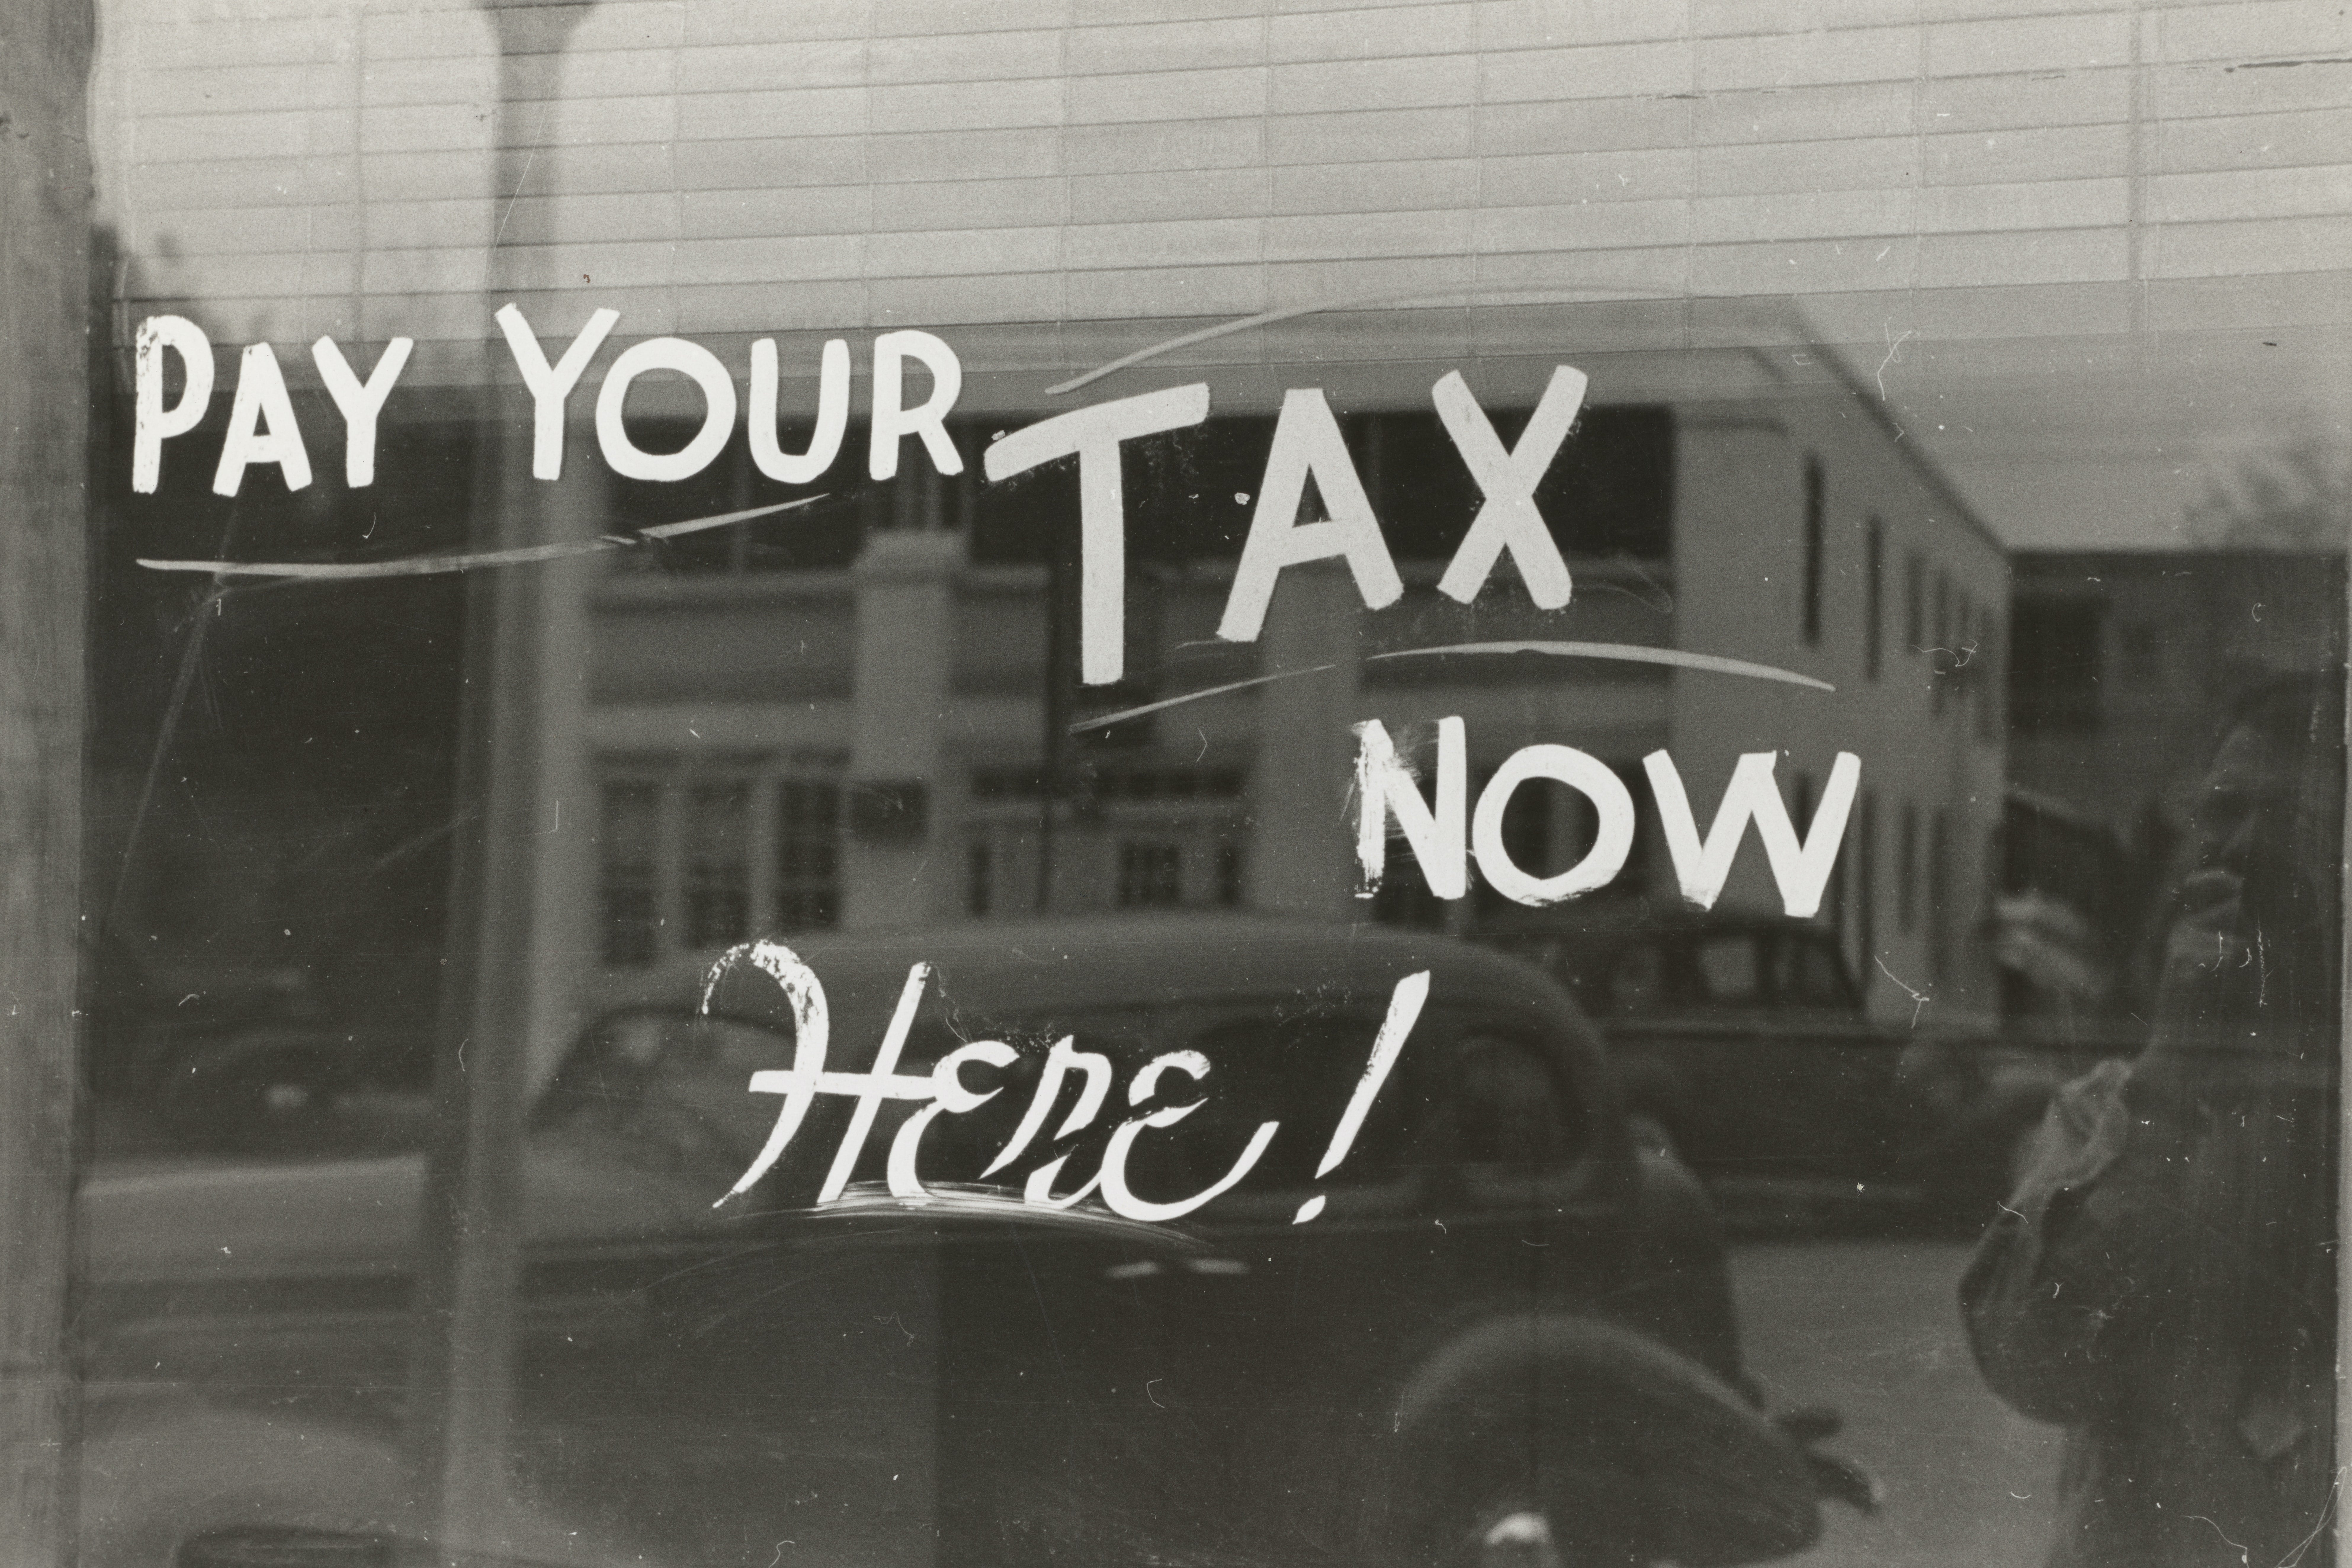 The words "Pay your tax now here!" written on a window that also reflects an old-timey car.